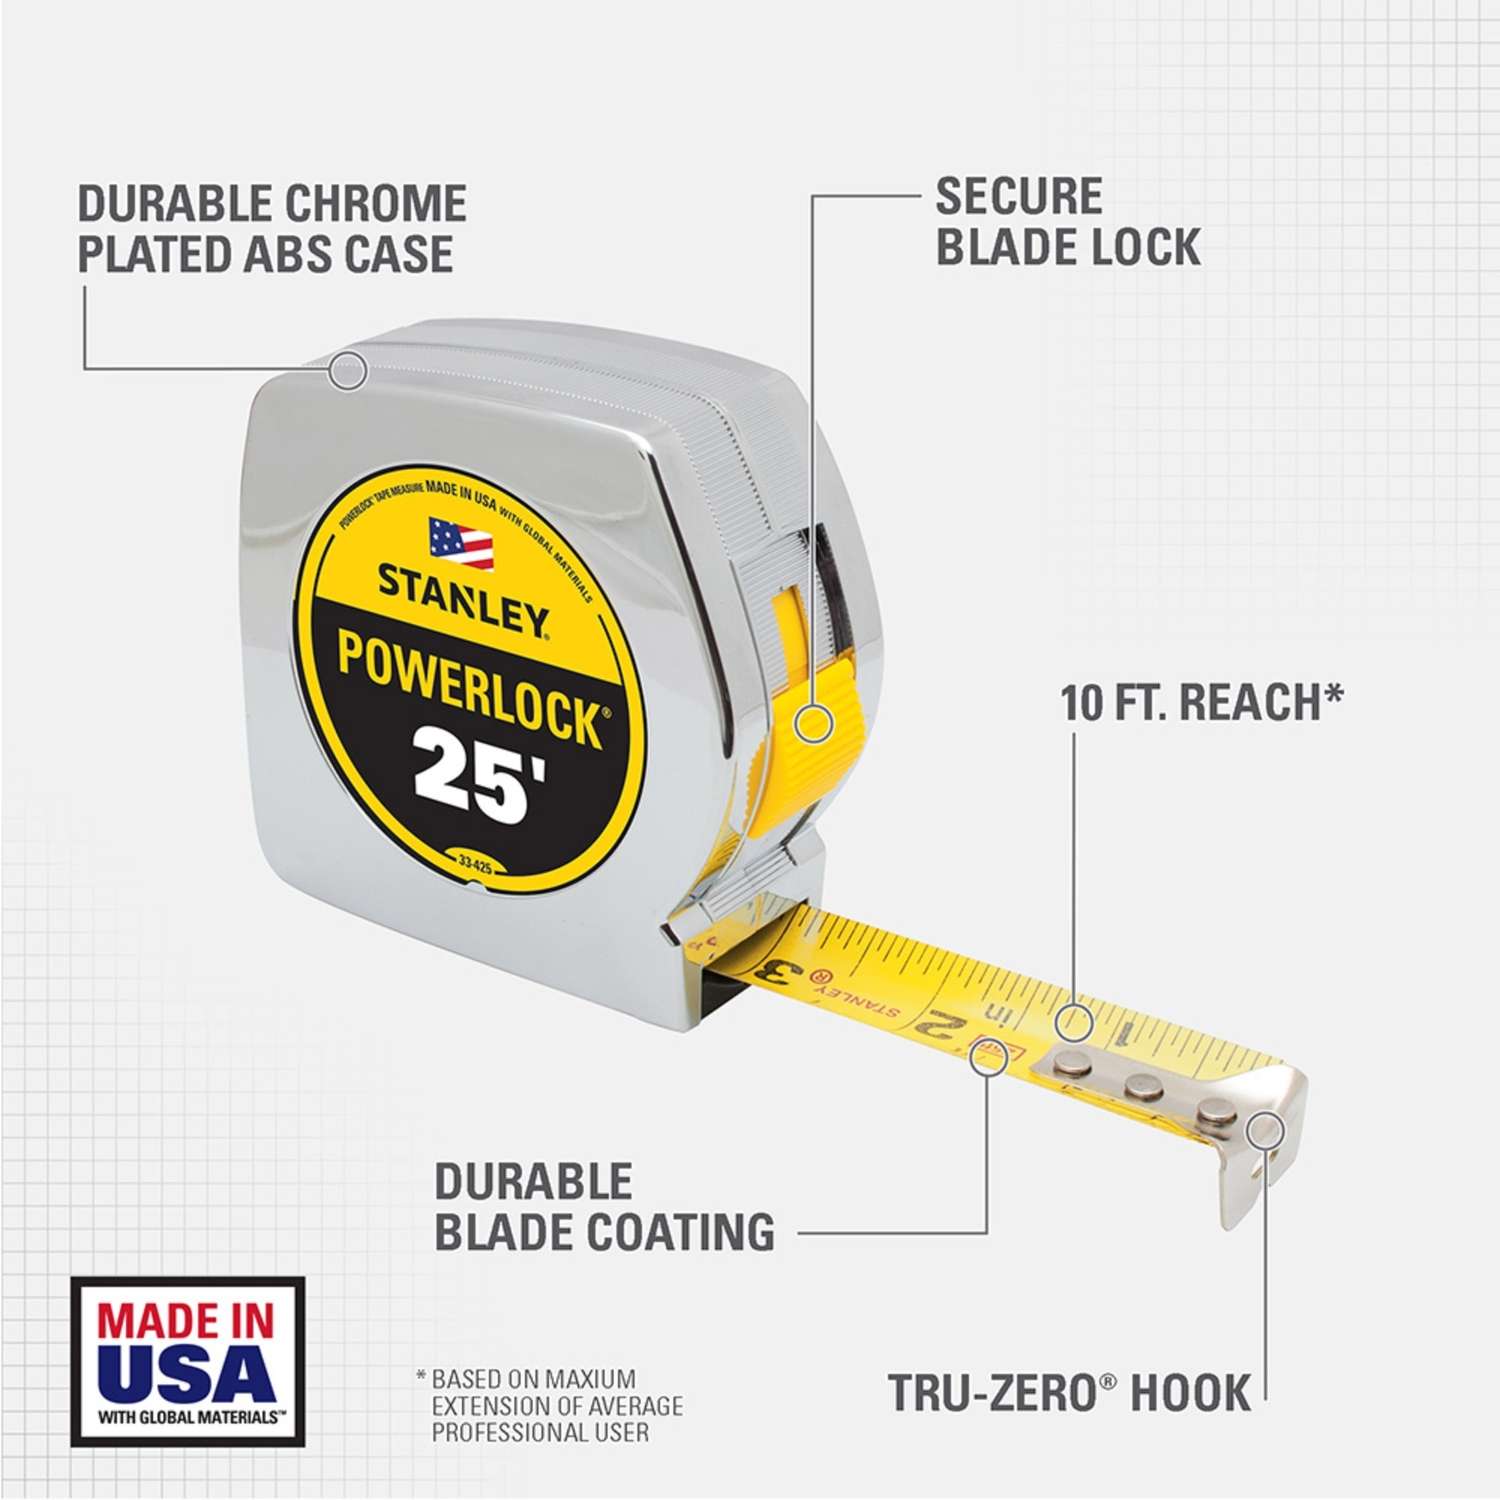 AAA.com l Stop & Lock Luggage Scale with Tape Measure